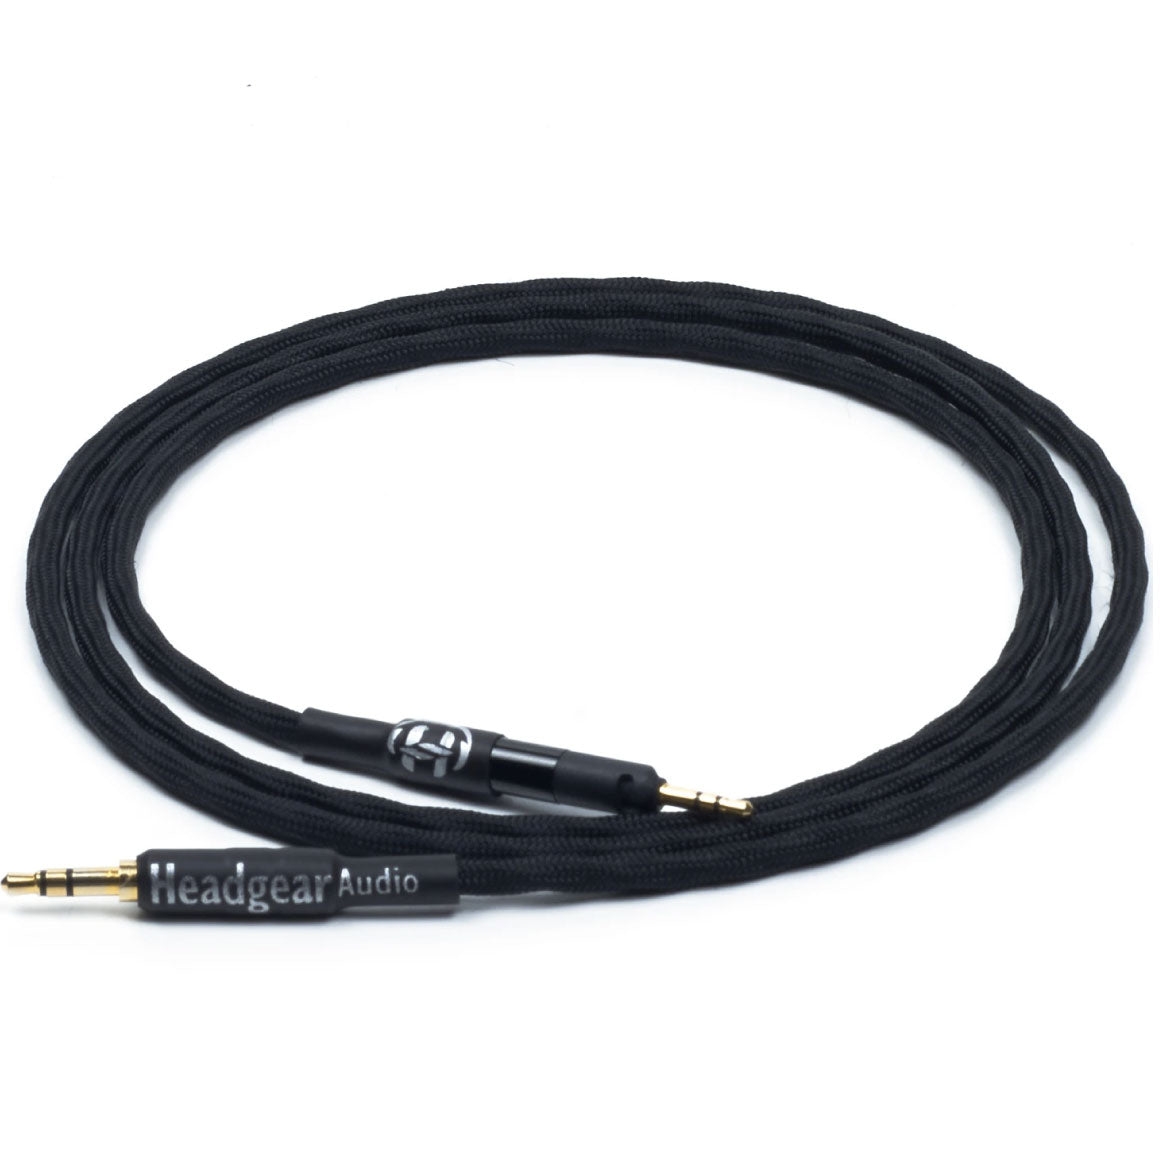 Headgear Audio - Replacement Upgrade Cable for Sennheiser Headphones